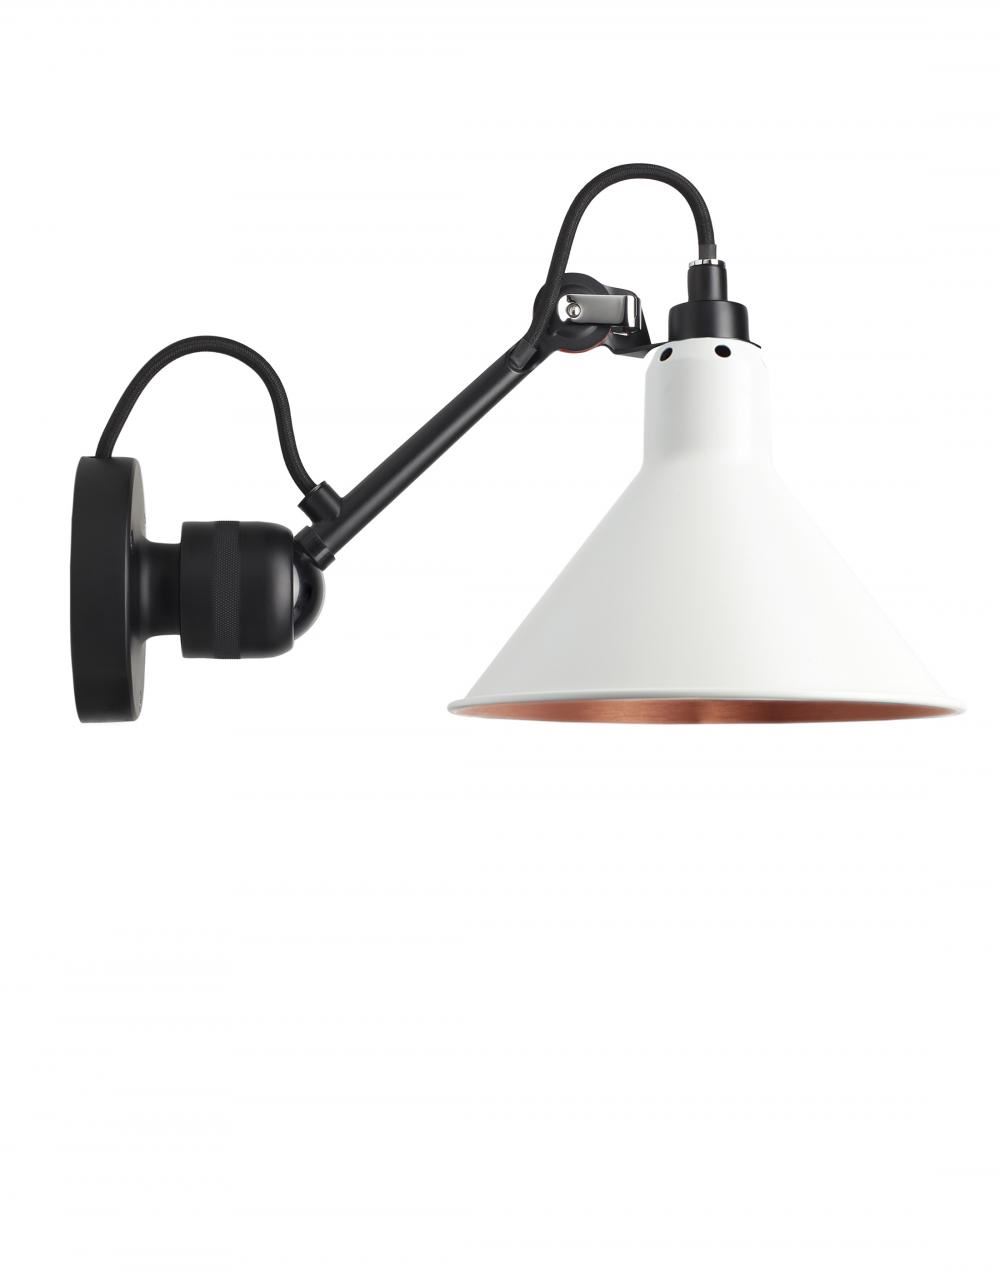 Lampe Gras 304 Small Wall Light Black Arm White Shade With Copper Interior Conic Hardwired